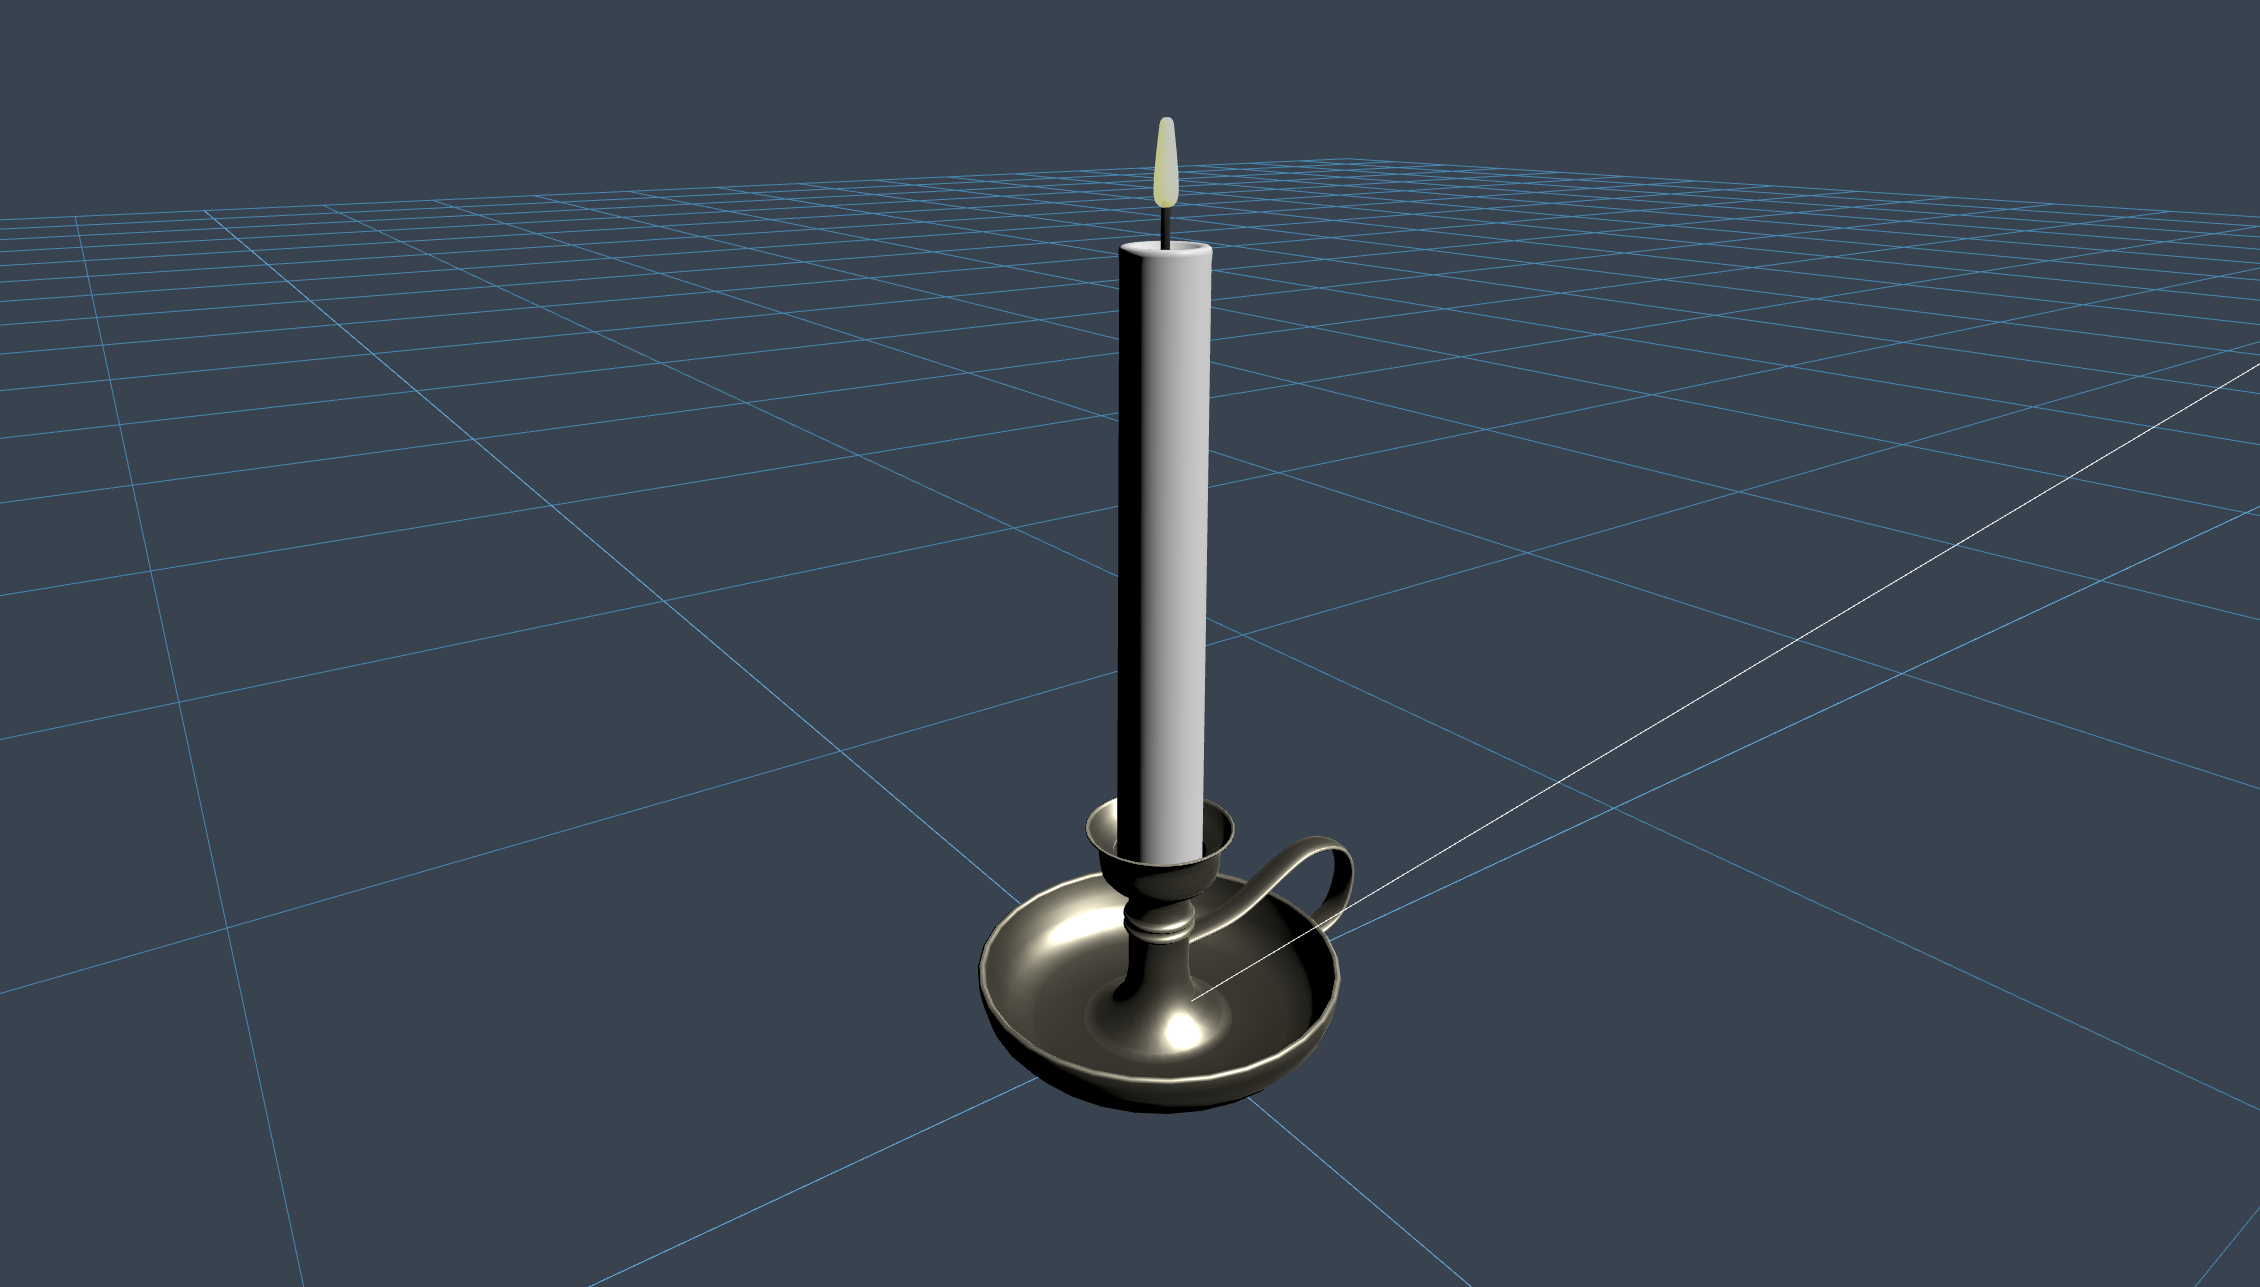 Candle - created by Niilo Korppi with 3D